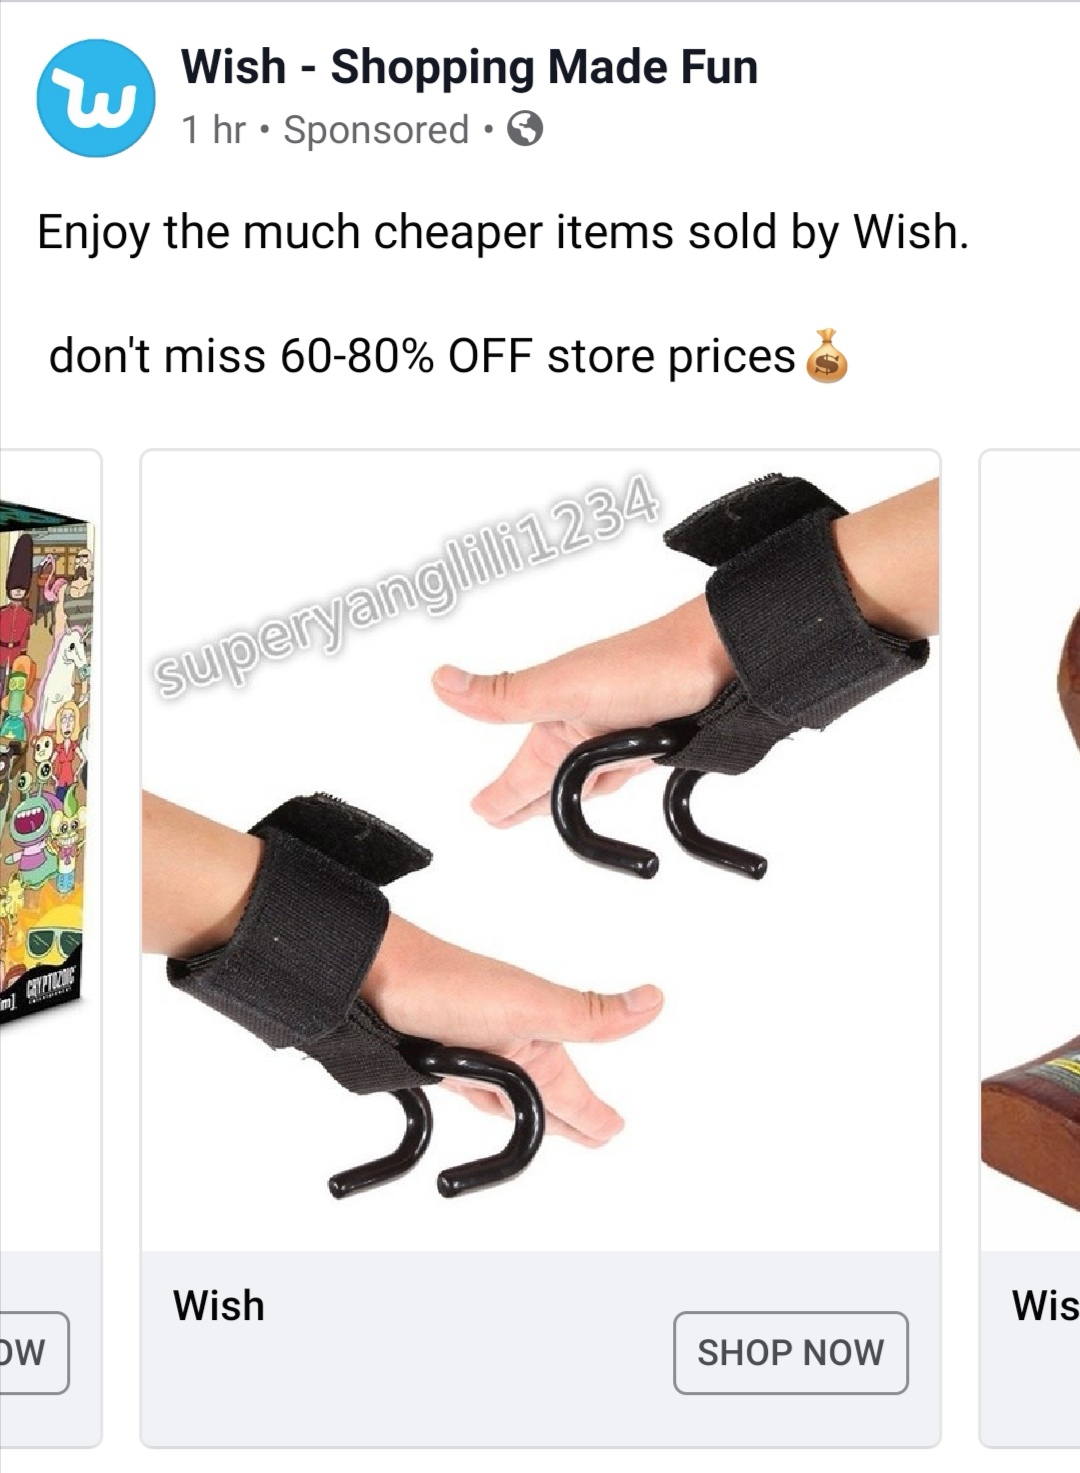 lifting weights with hand injury - Wish Shopping Made Fun 1 hr Sponsored Enjoy the much cheaper items sold by Wish. don't miss 6080% Off store prices $ 234 Siun mlk Wish Wis Dw Shop Now